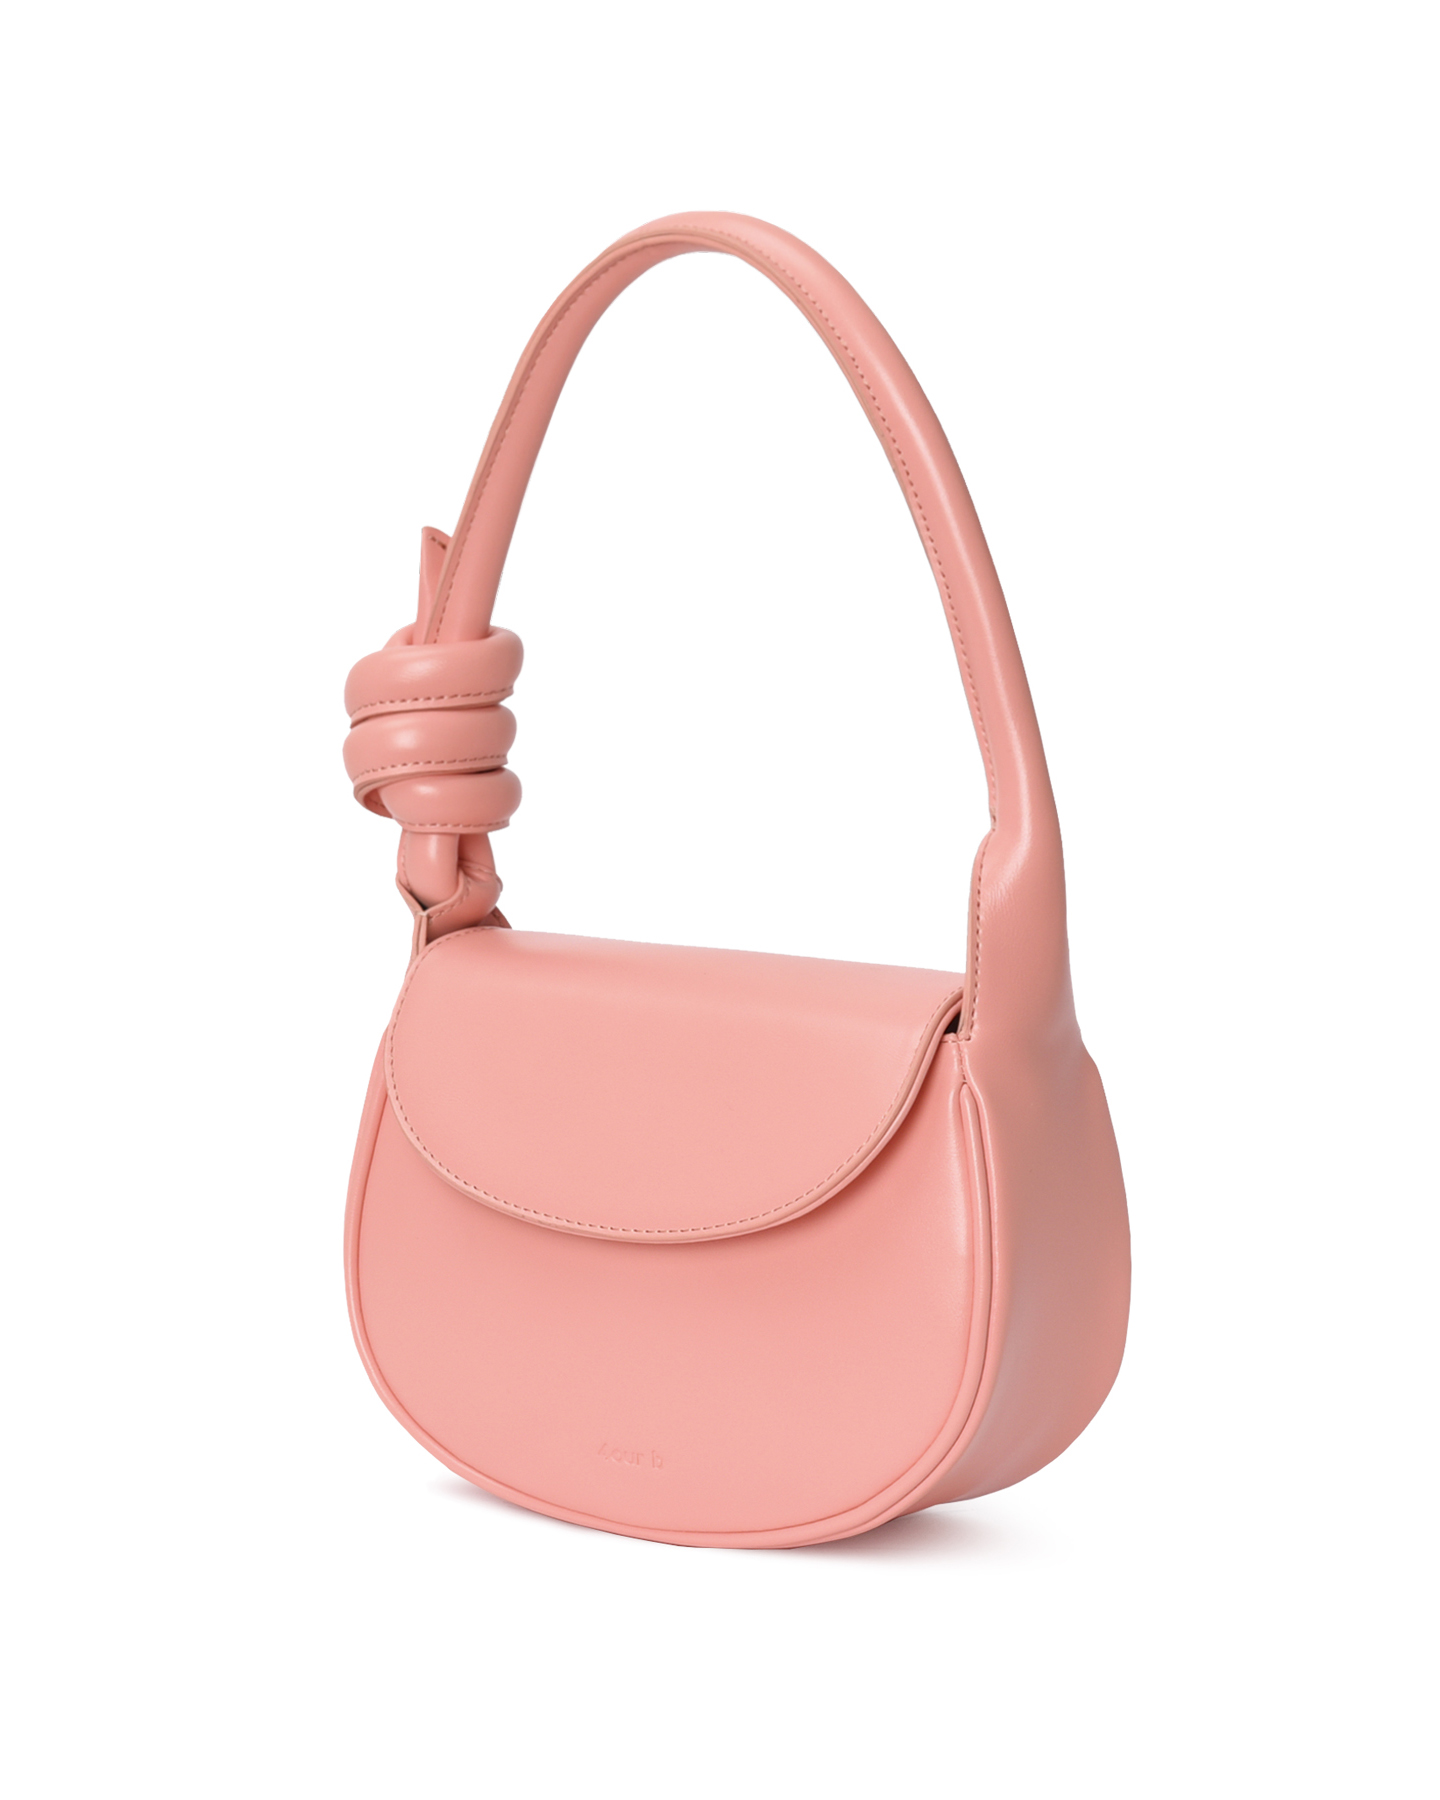 Dolphin Bag Pink